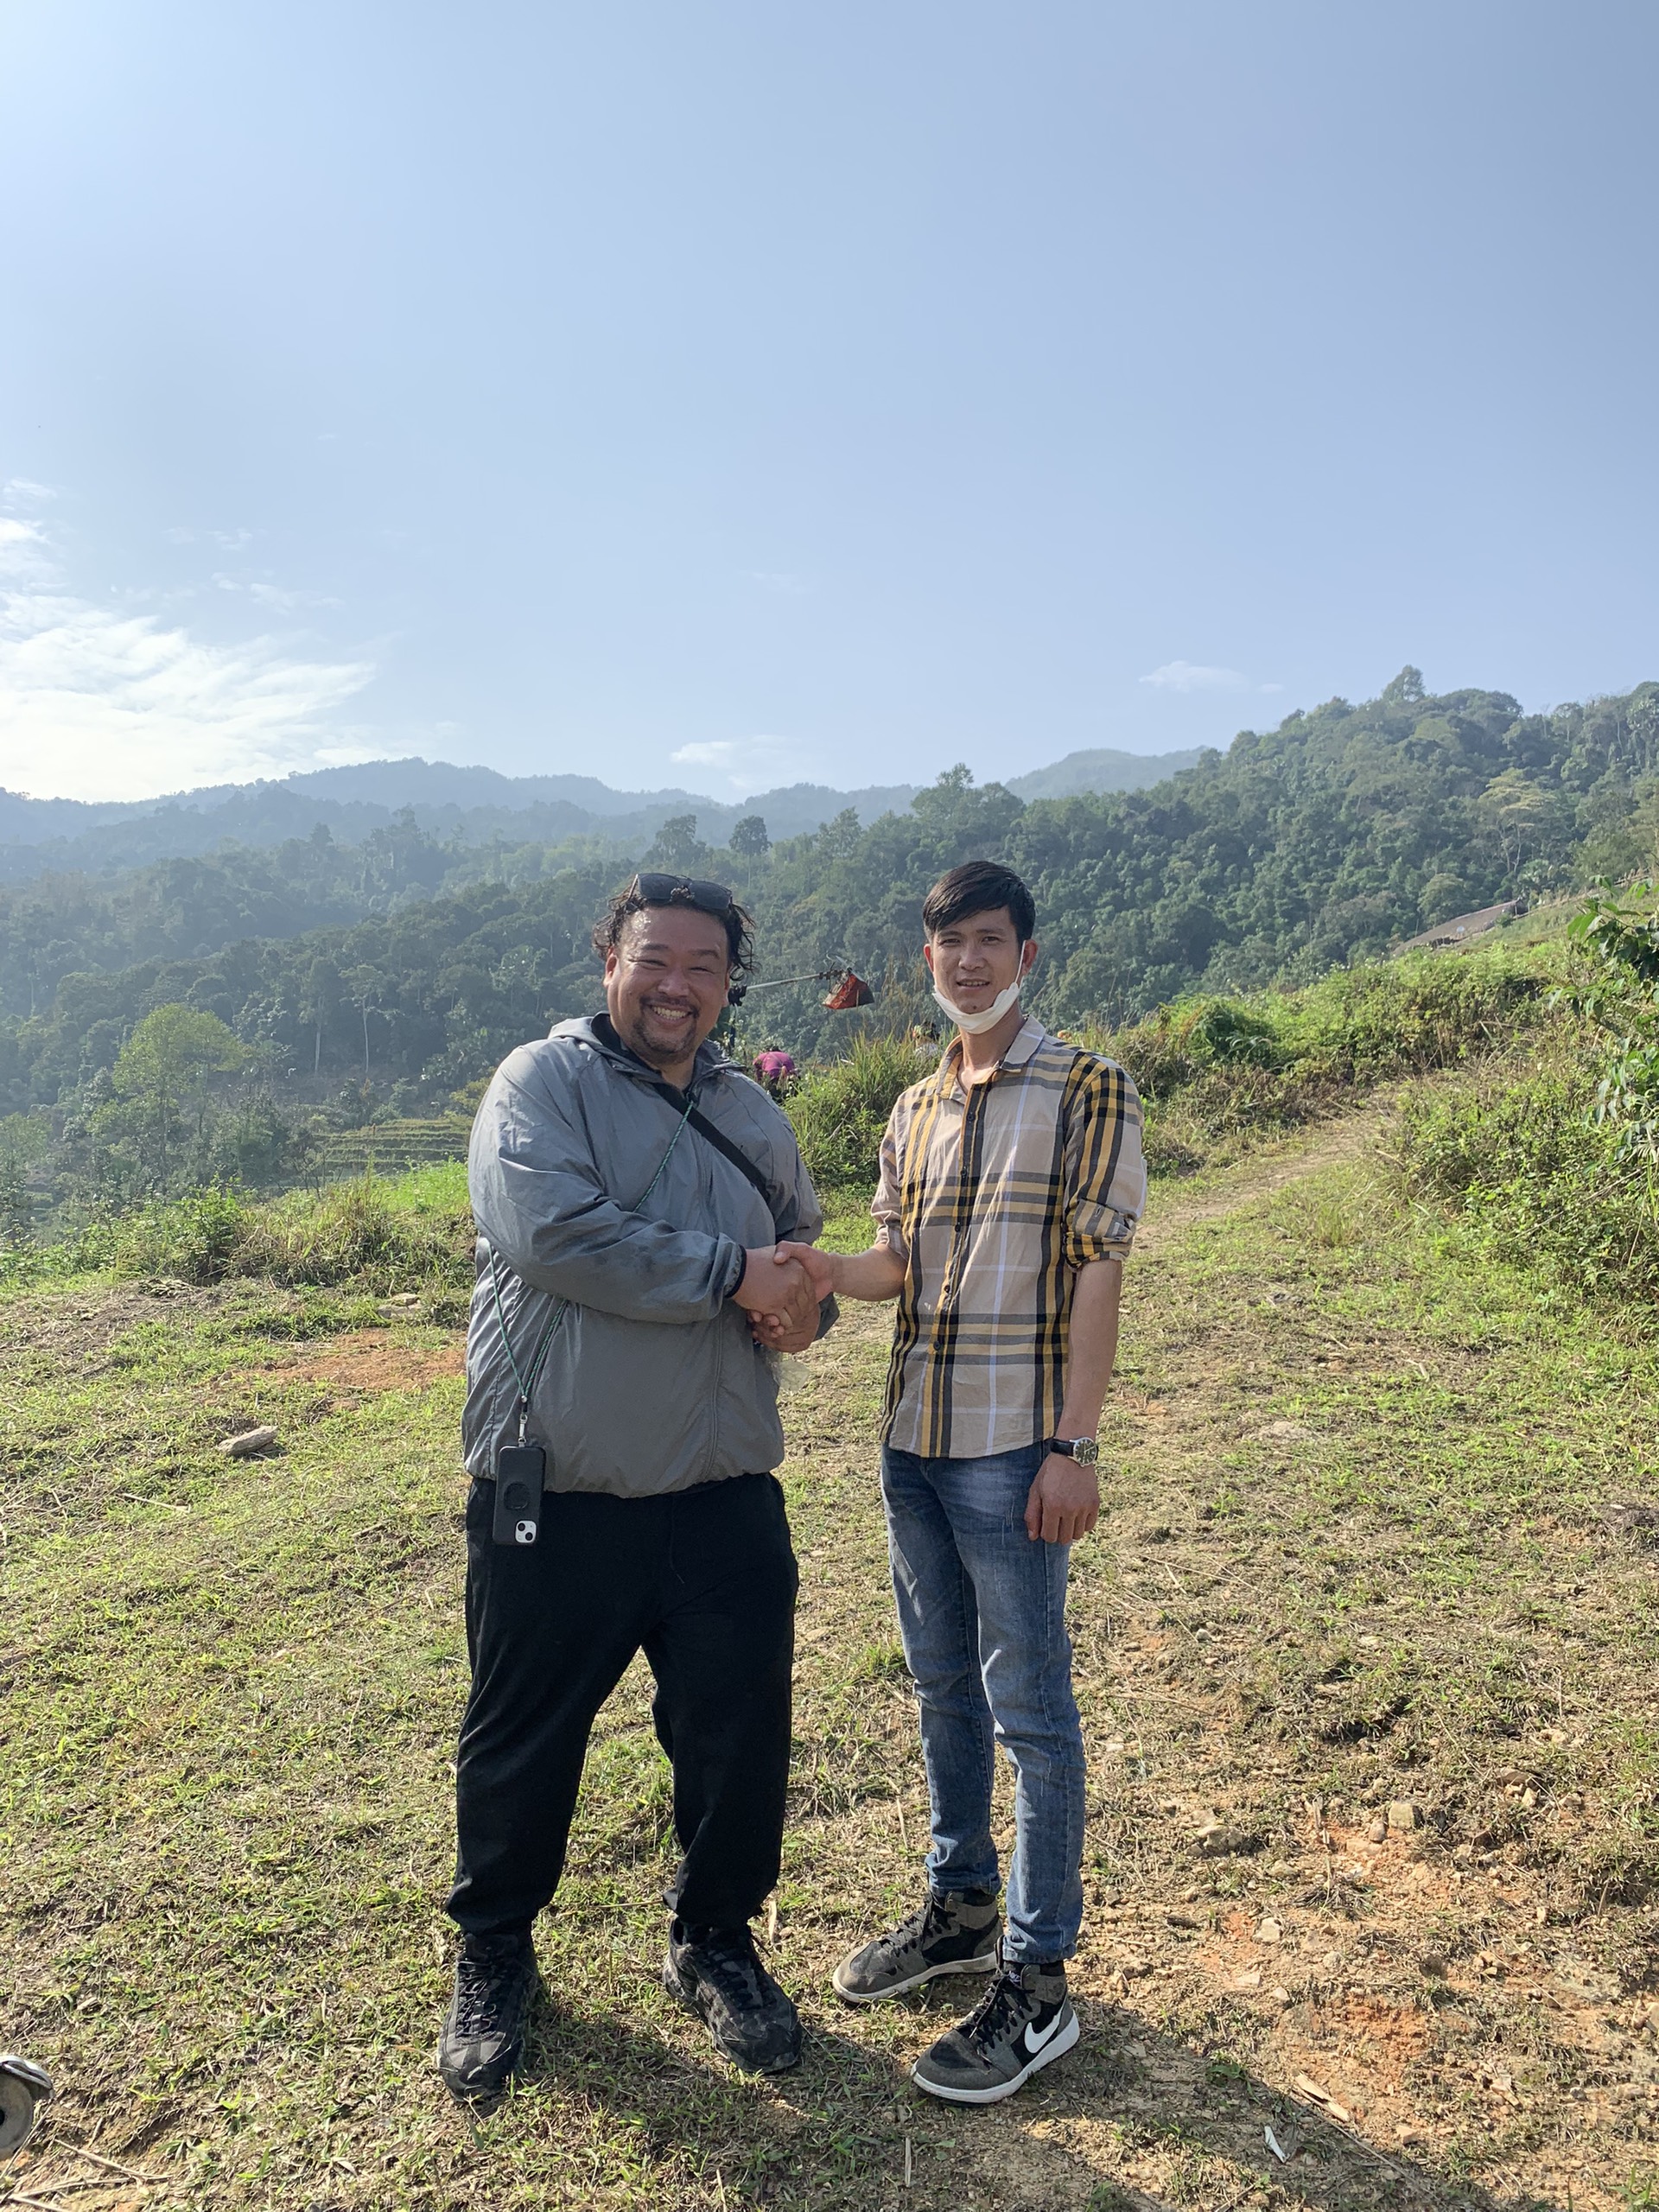 Matsuo Tomoyuki (left) poses for a photo with Hoang Van Chung, who is in charge of the buckwheat cultivation project on 50 hectares for JVGA in Phuong Thien Commune, Ha Giang Province, in a provided photo.